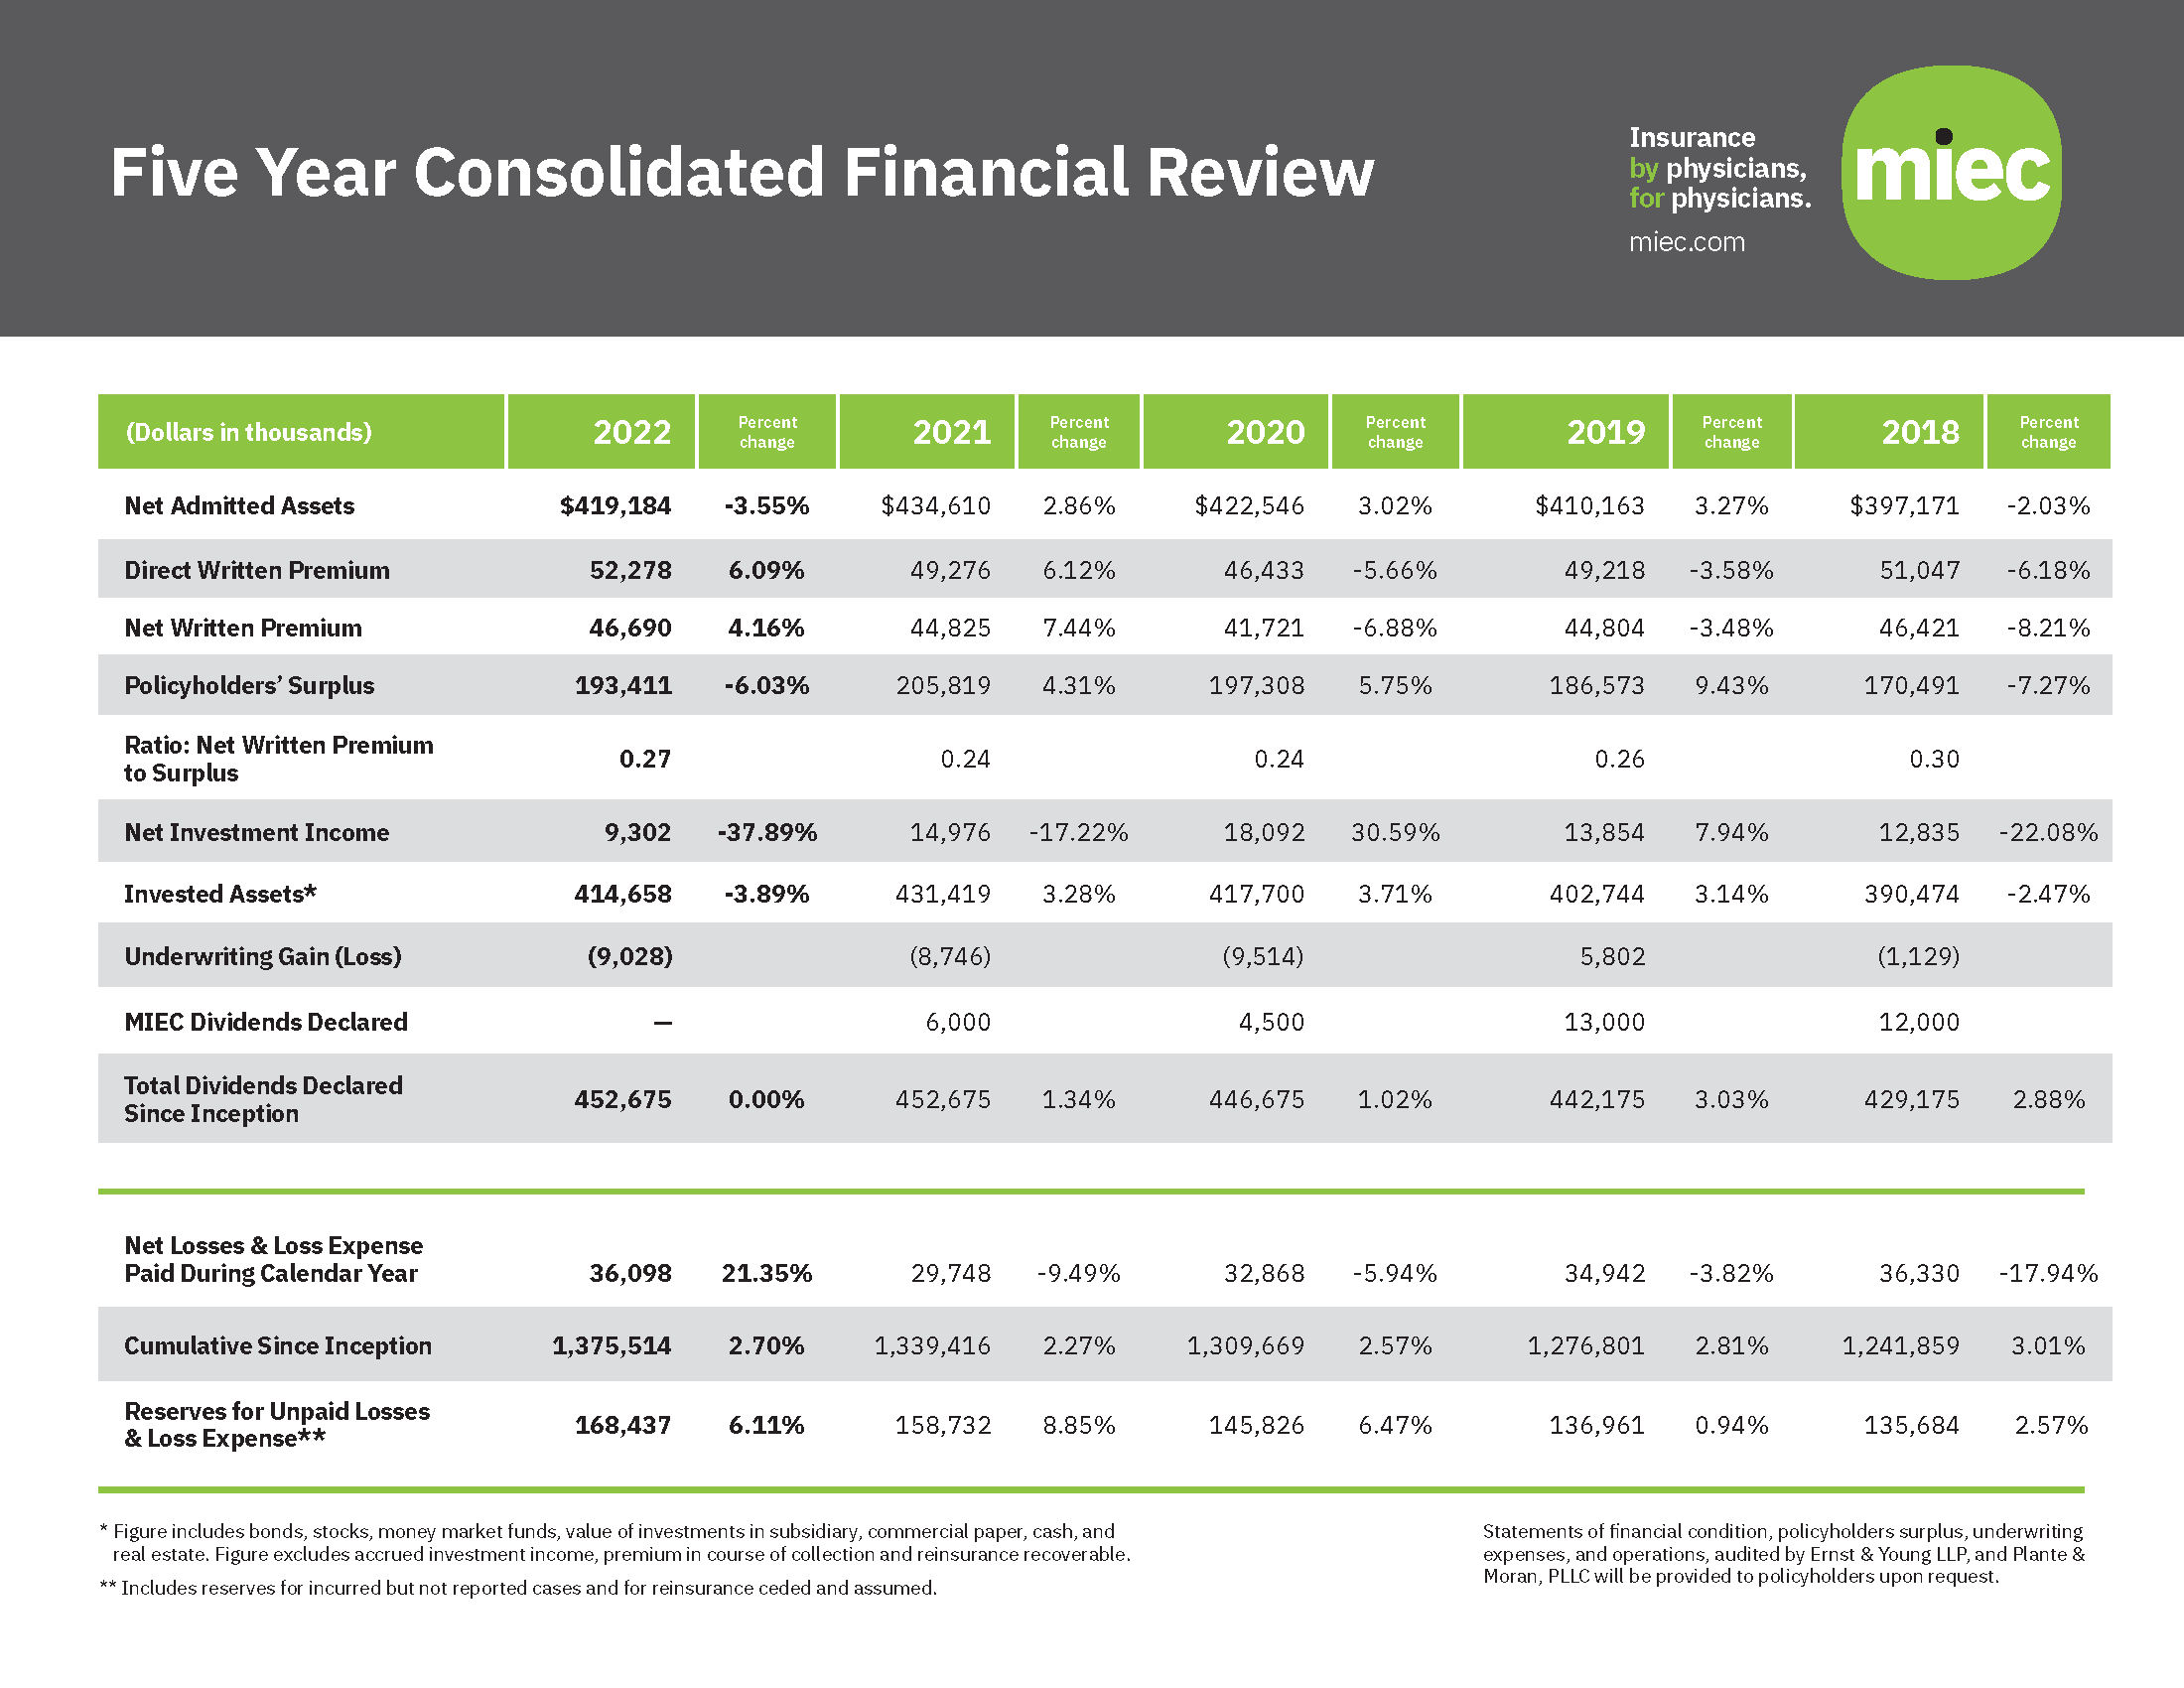 Image of a financial table showing key finanical stats and year over year changes from 2018-2022